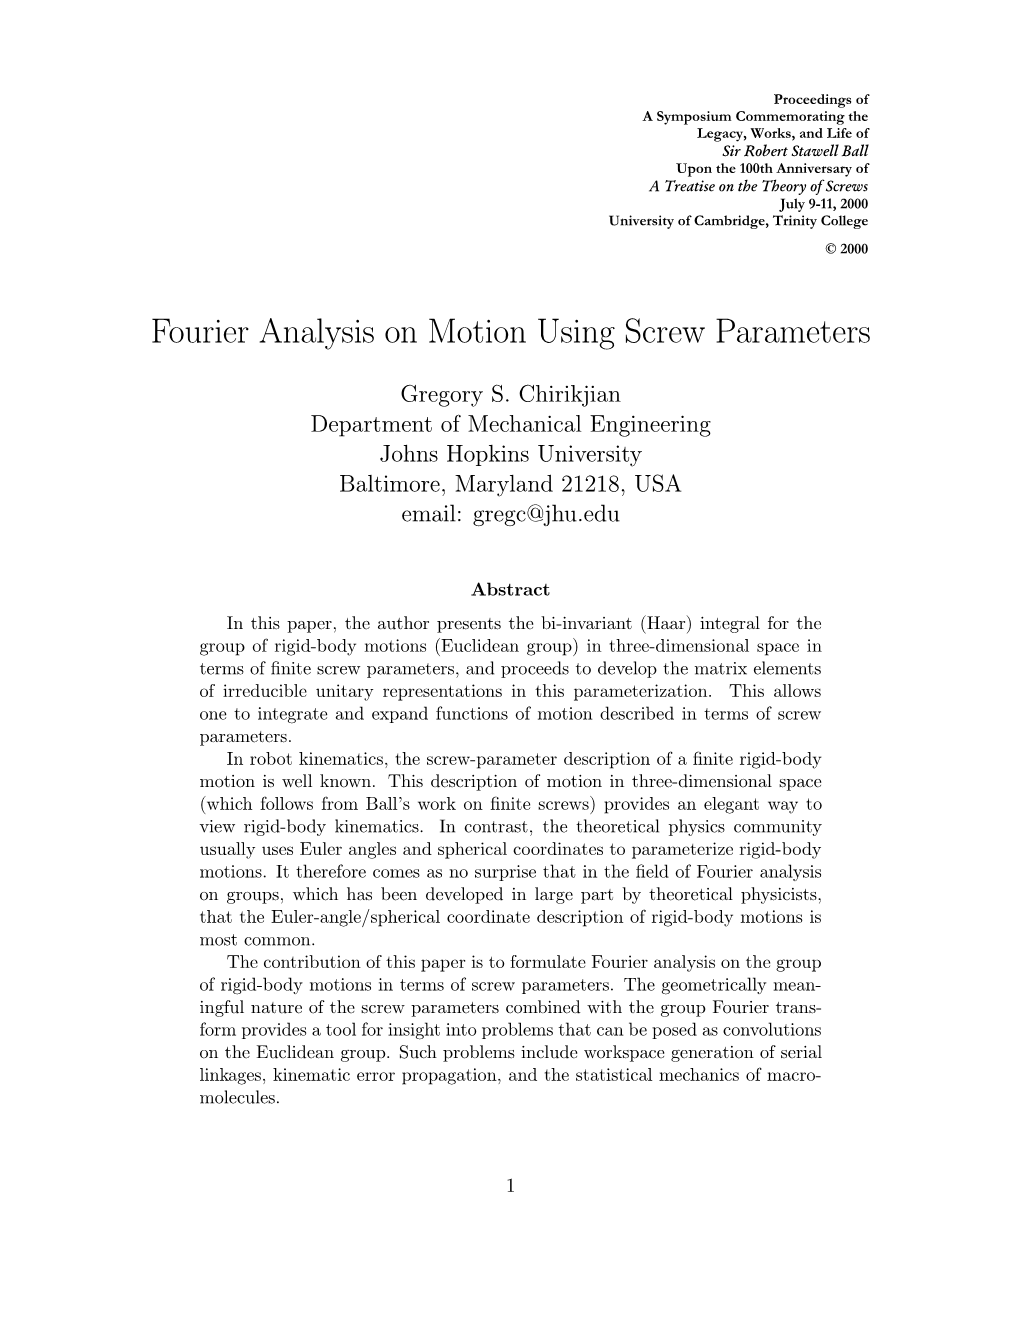 Fourier Analysis on Motion Using Screw Parameters